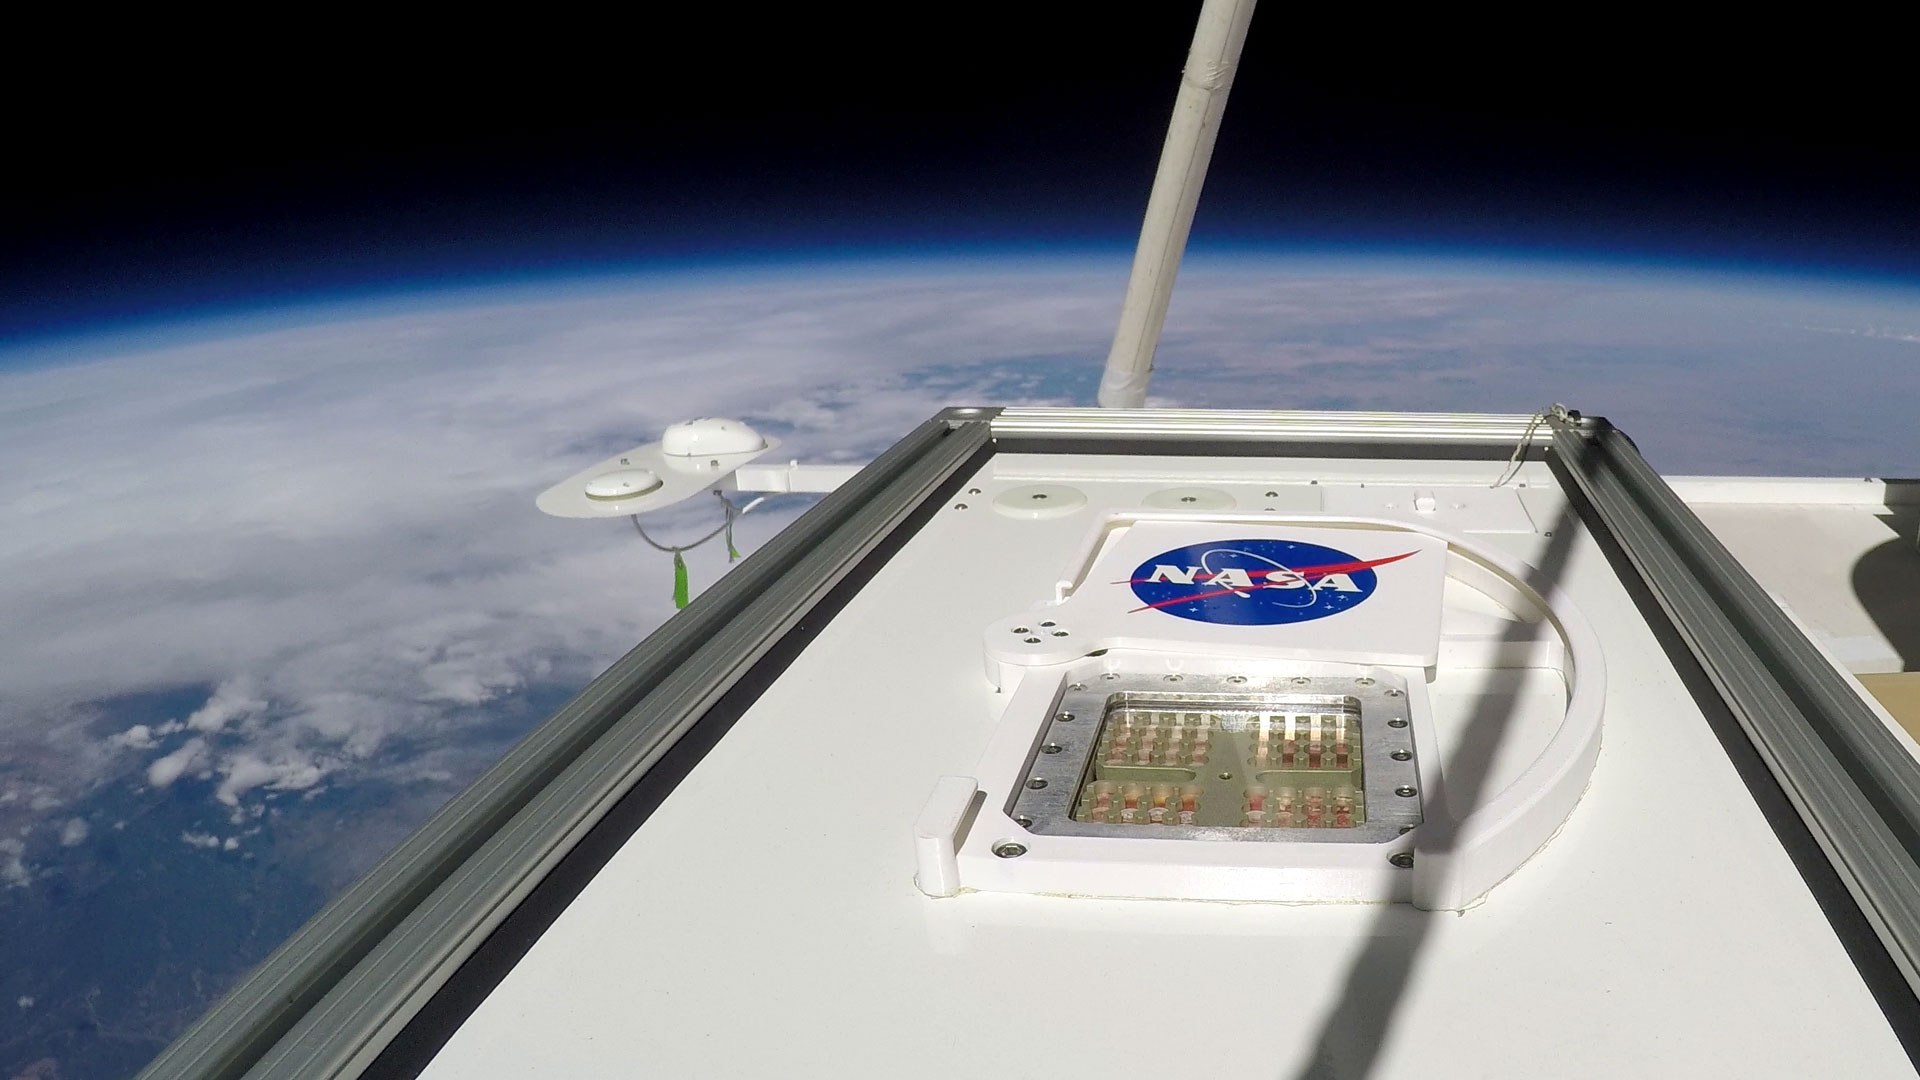 DLR sample carrier containing bacteria and fungi during its nine-hour journey into the stratosphere